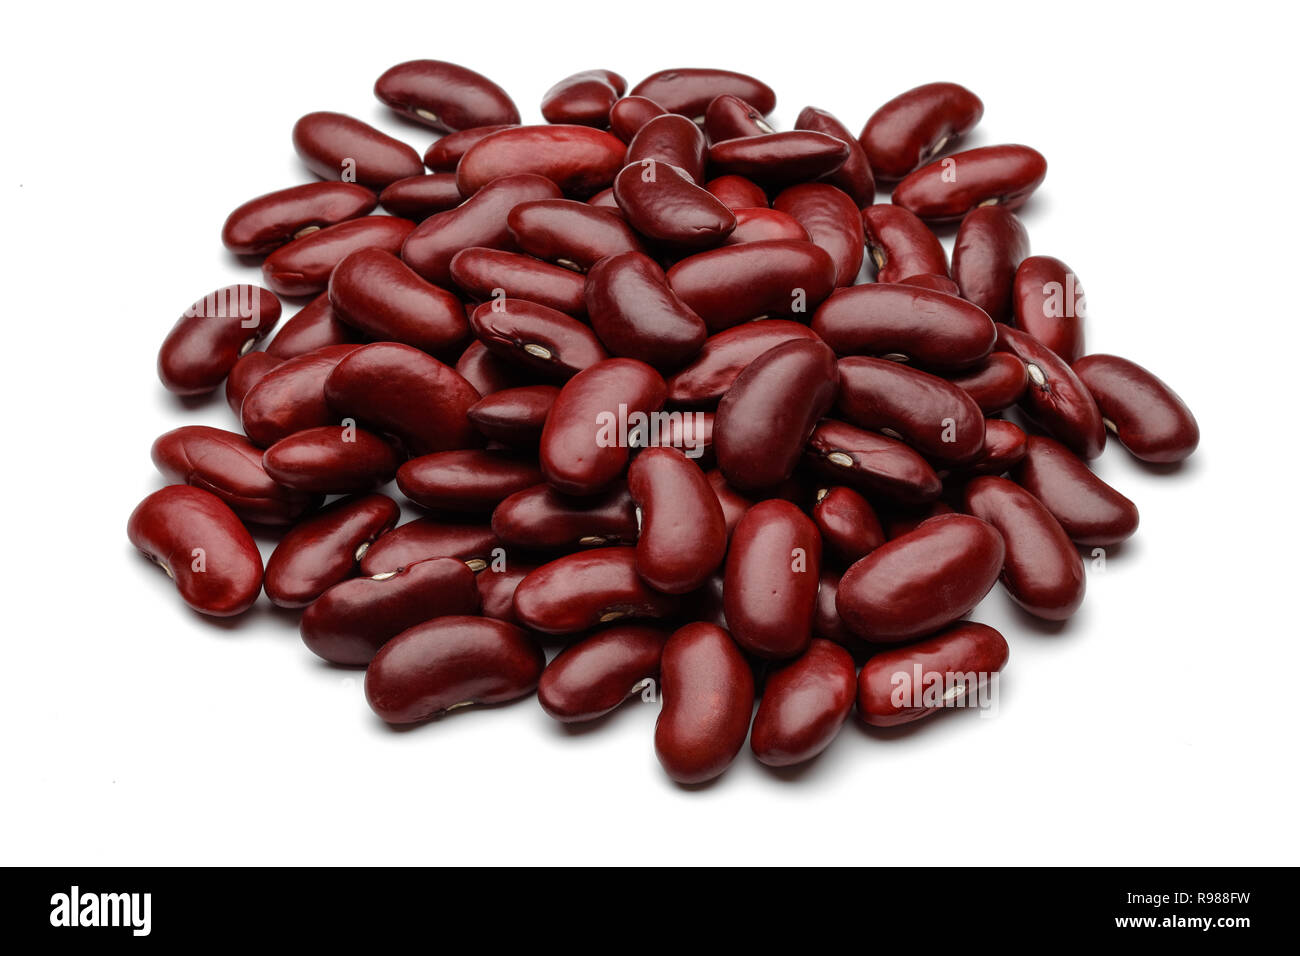 Heap of kidney beans isolated on white background Stock Photo